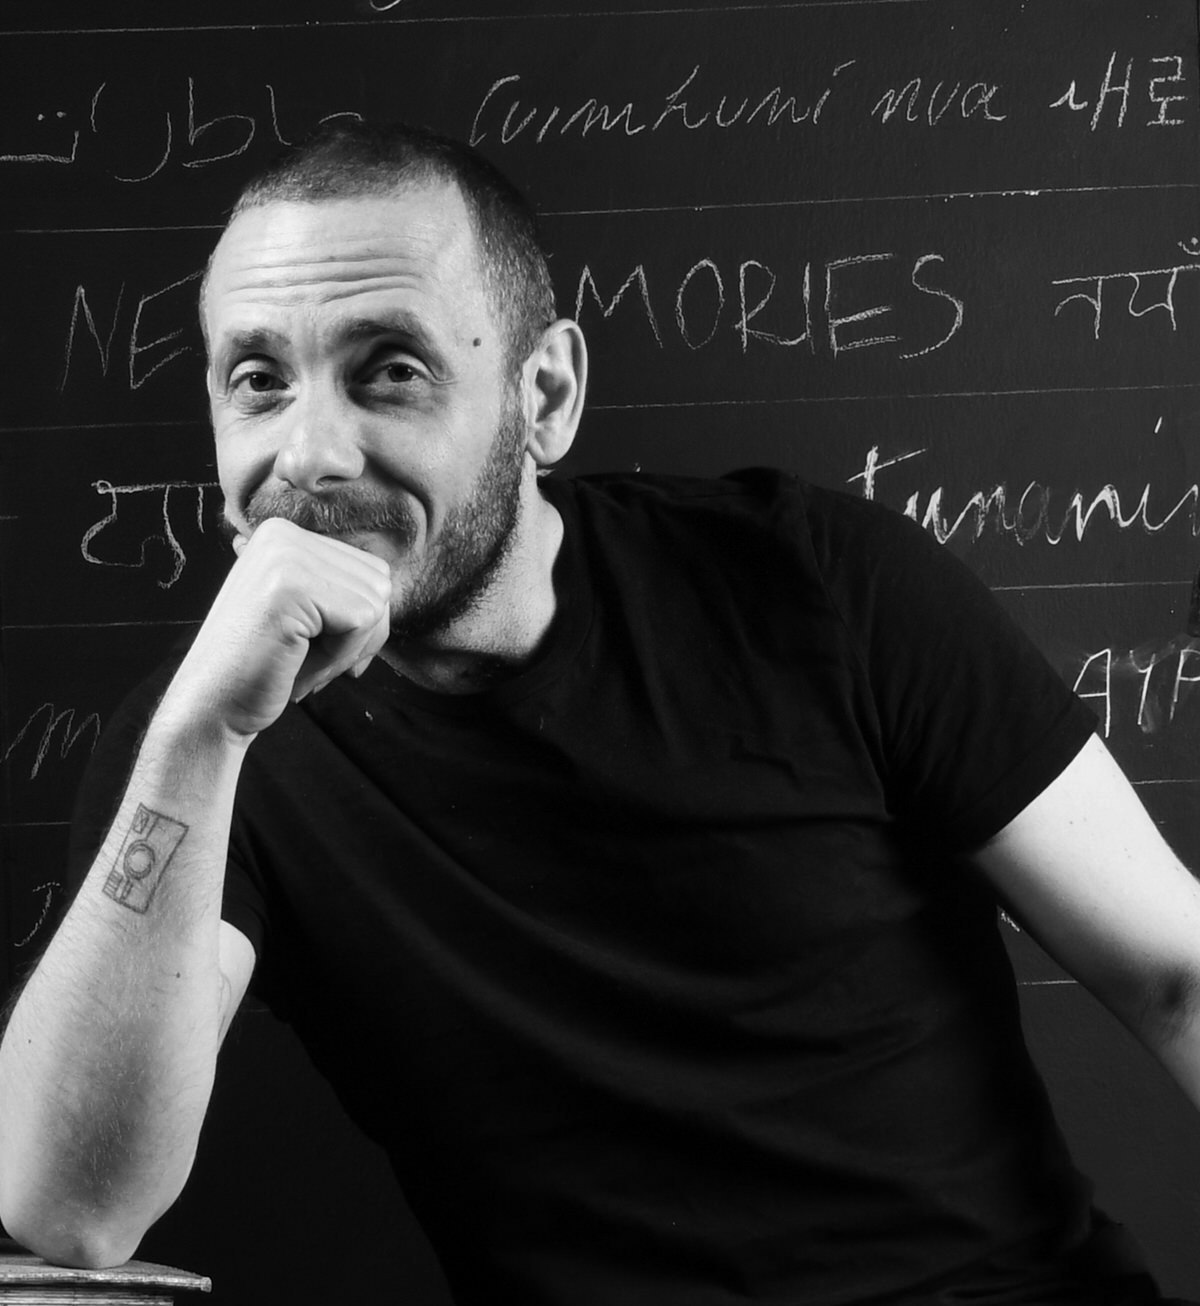 A black and white portrait of a man from the chest up, sitting in front of a blackboard, resting his head on his closed fist, looking into the camera